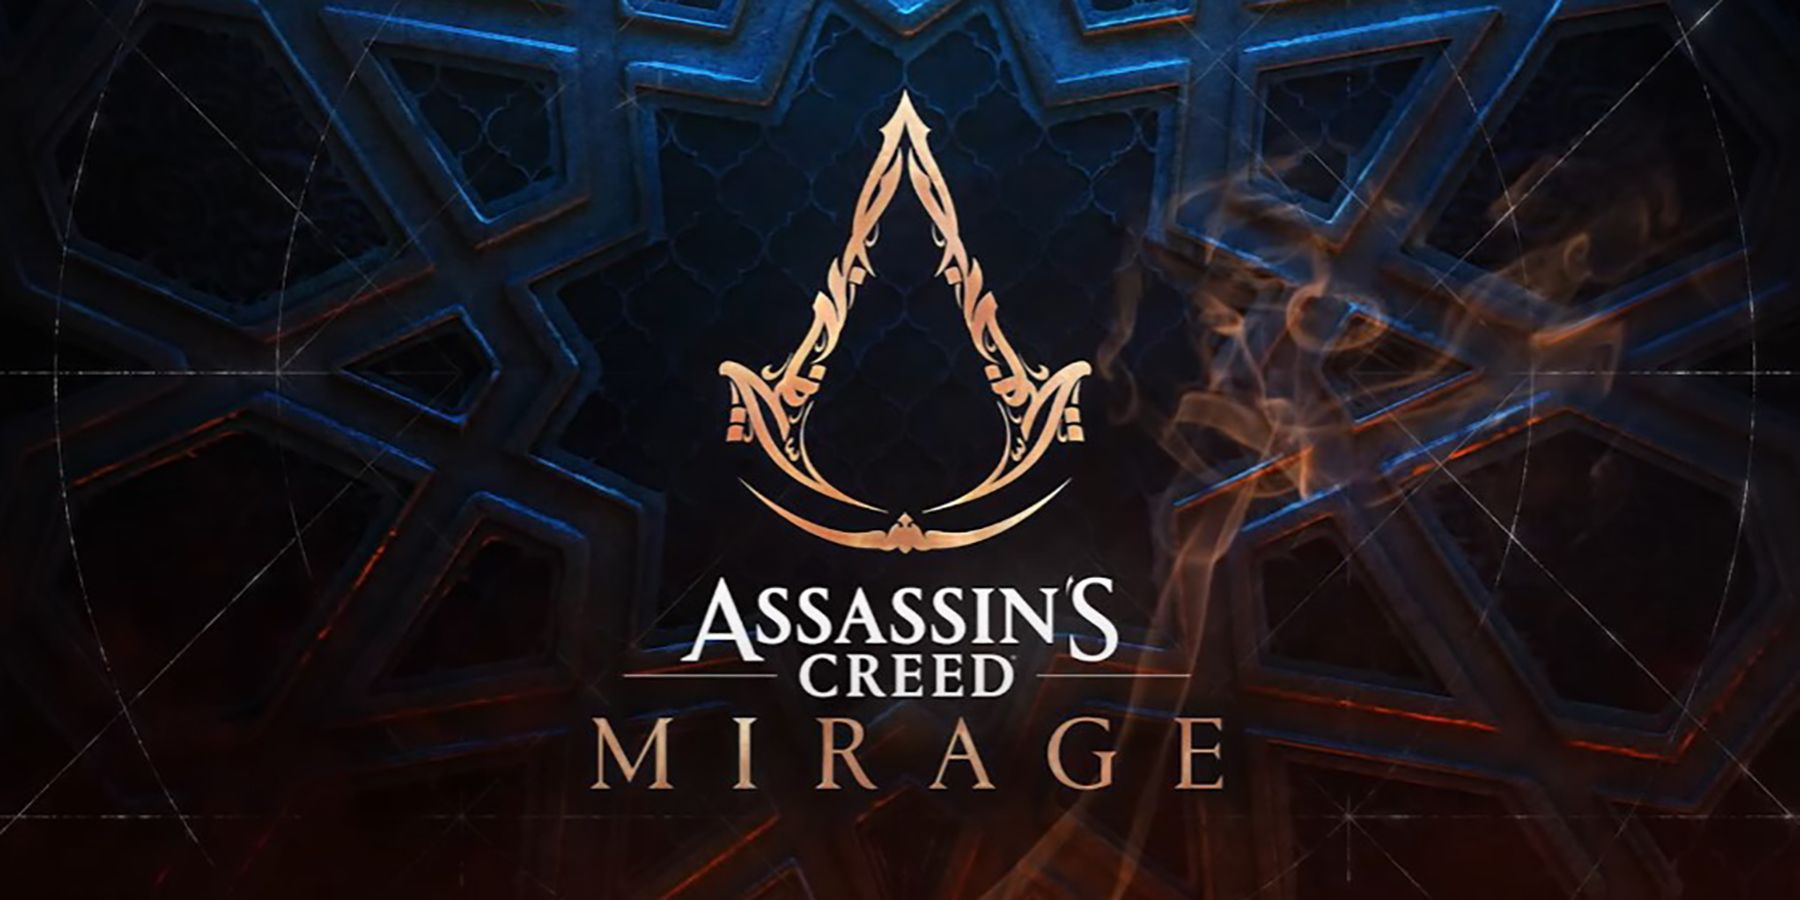 New Assassin's Creed Mirage Story and Gameplay Details Revealed